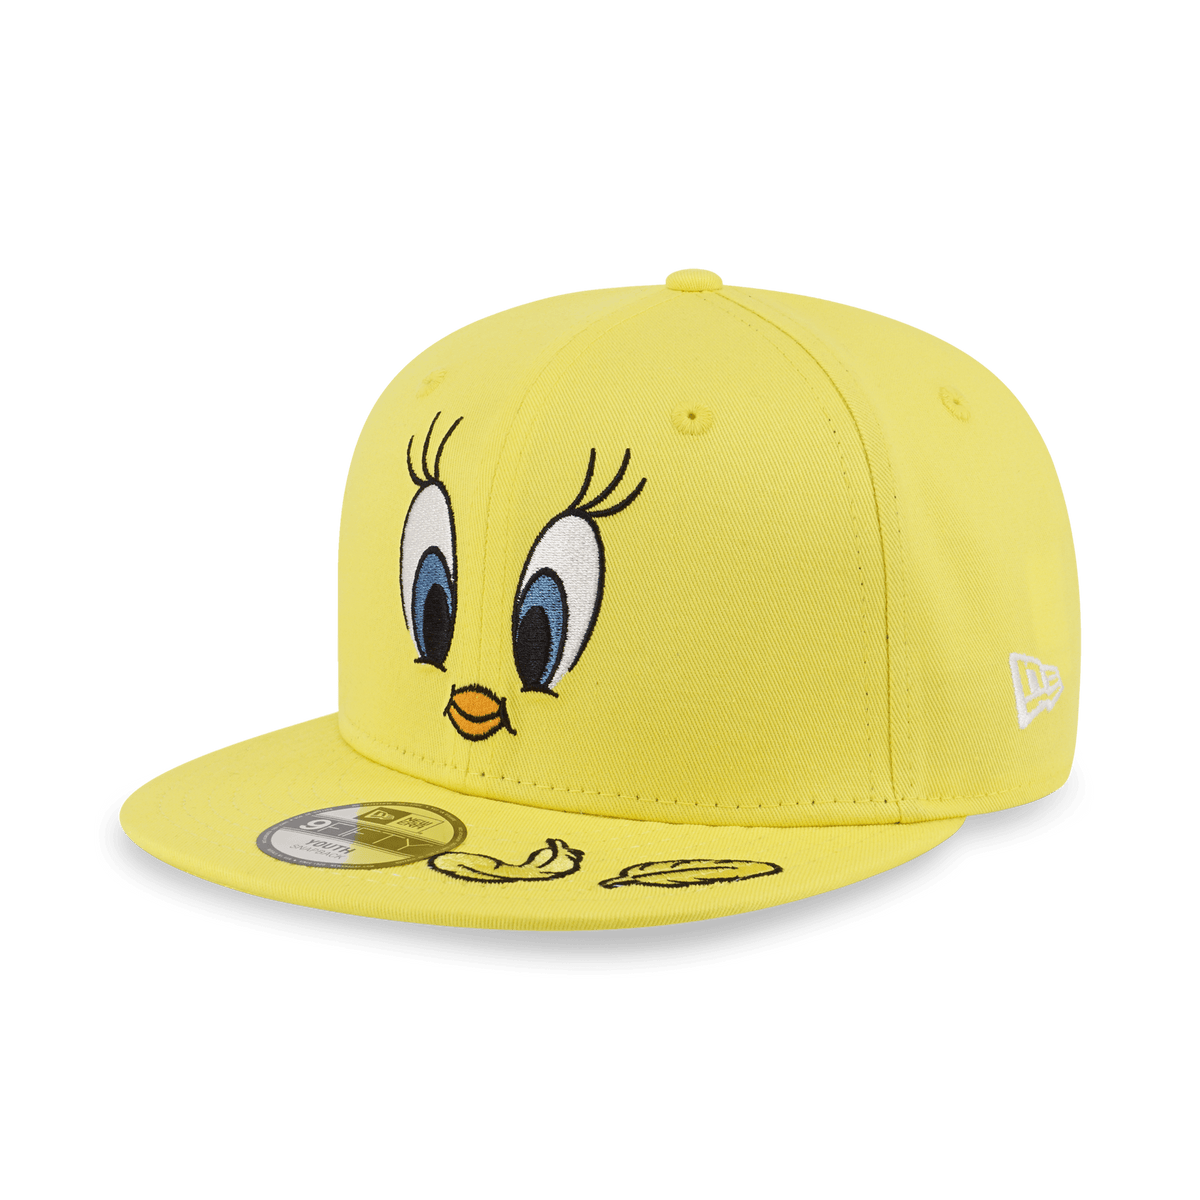 Youth 9FIFTY Looney Tunes Tweety イエロー | ニューエラ